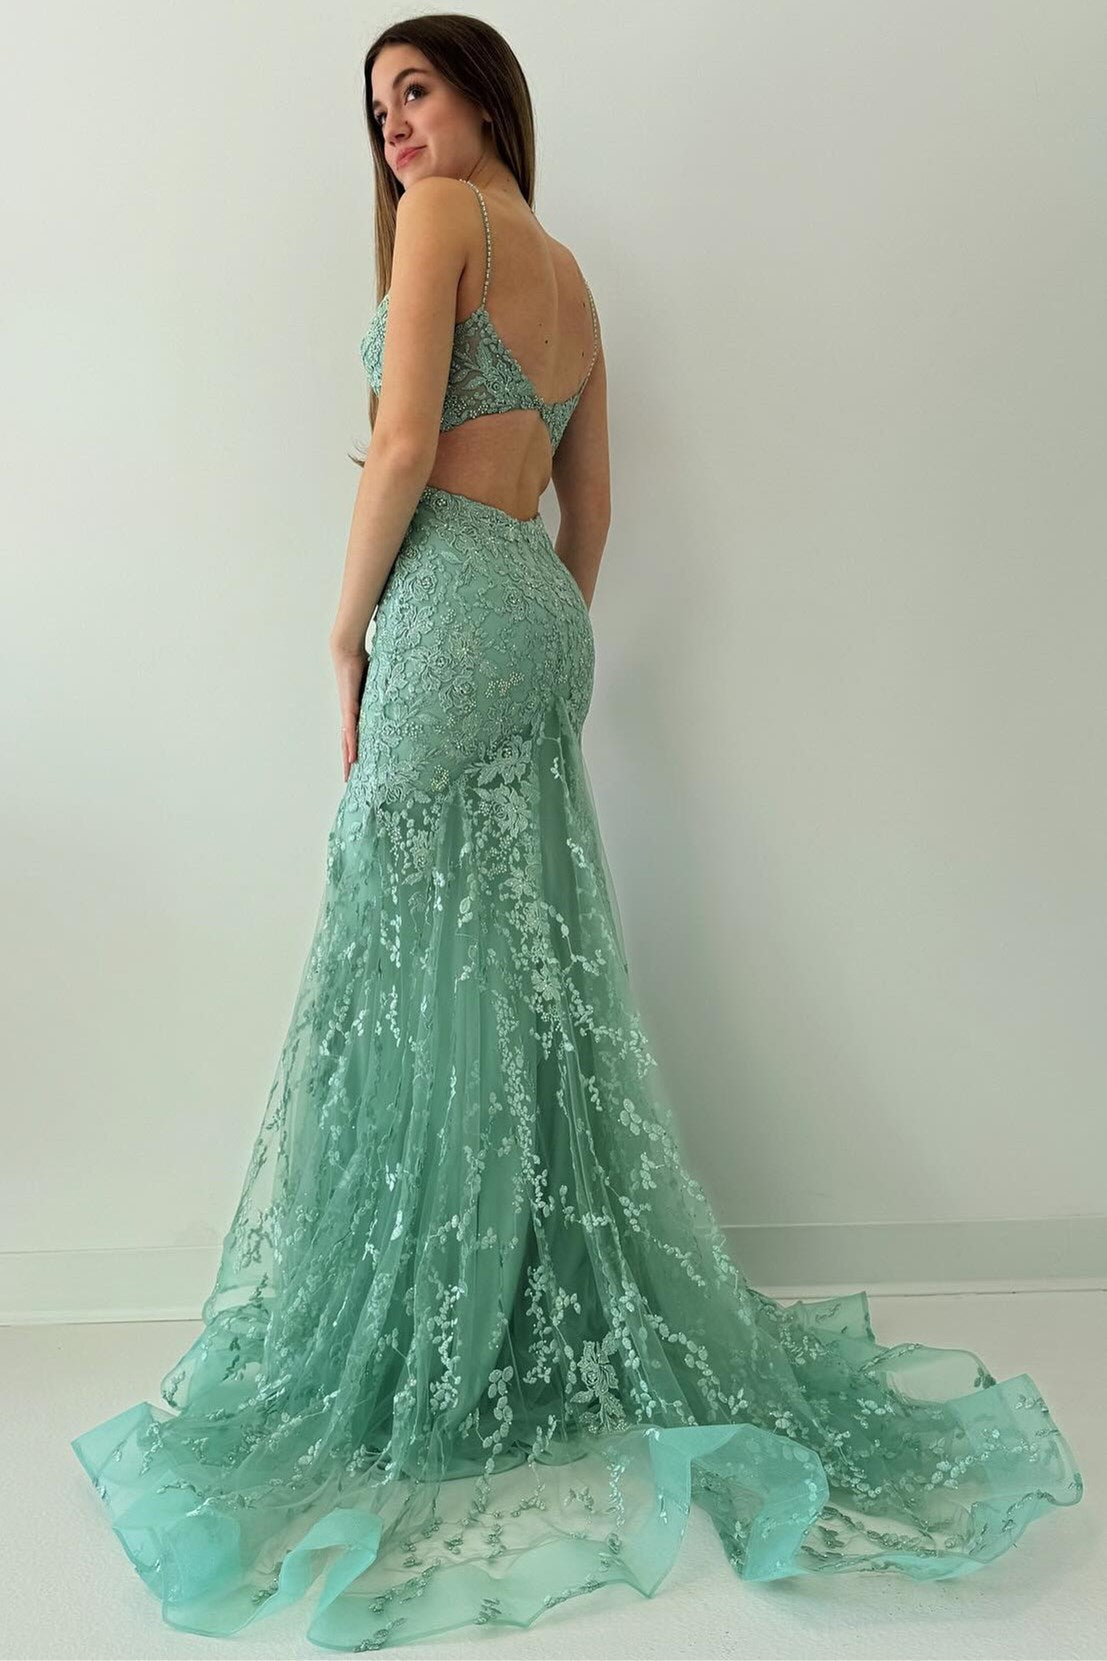 Sage Green Lace Mermaid Open Back Long Prom Dress - DollyGown